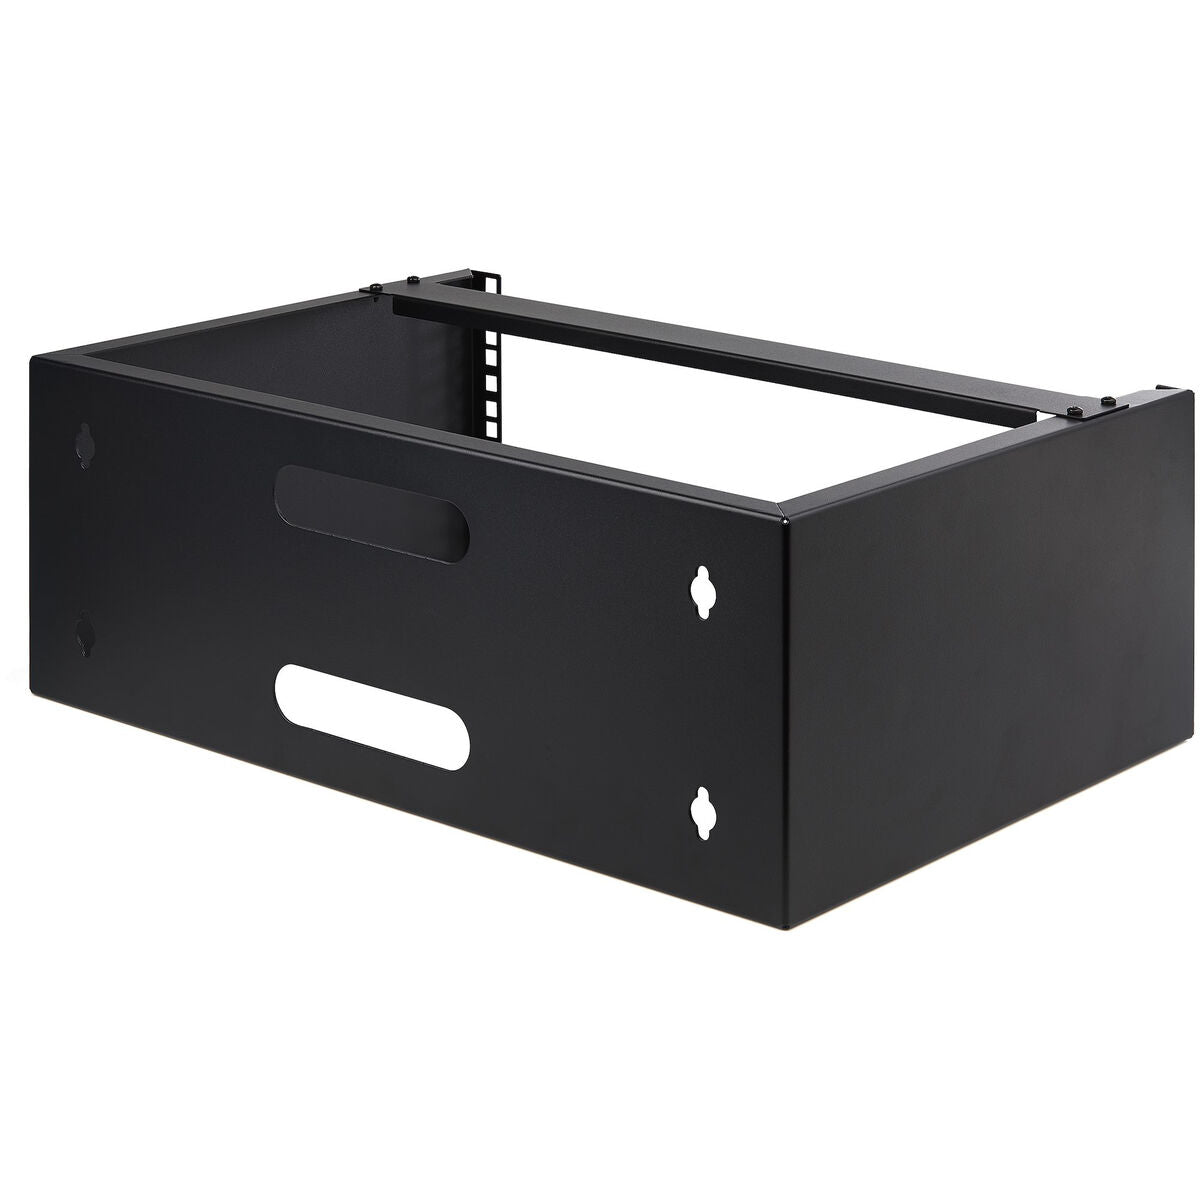 Fixed Tray for Wall Rack Cabinet Startech WALLMOUNT4, Startech, Computing, Accessories, fixed-tray-for-wall-rack-cabinet-startech-wallmount4, Brand_Startech, category-reference-2609, category-reference-2803, category-reference-2828, category-reference-t-19685, category-reference-t-19908, Condition_NEW, furniture, networks/wiring, organisation, Price_50 - 100, Teleworking, RiotNook